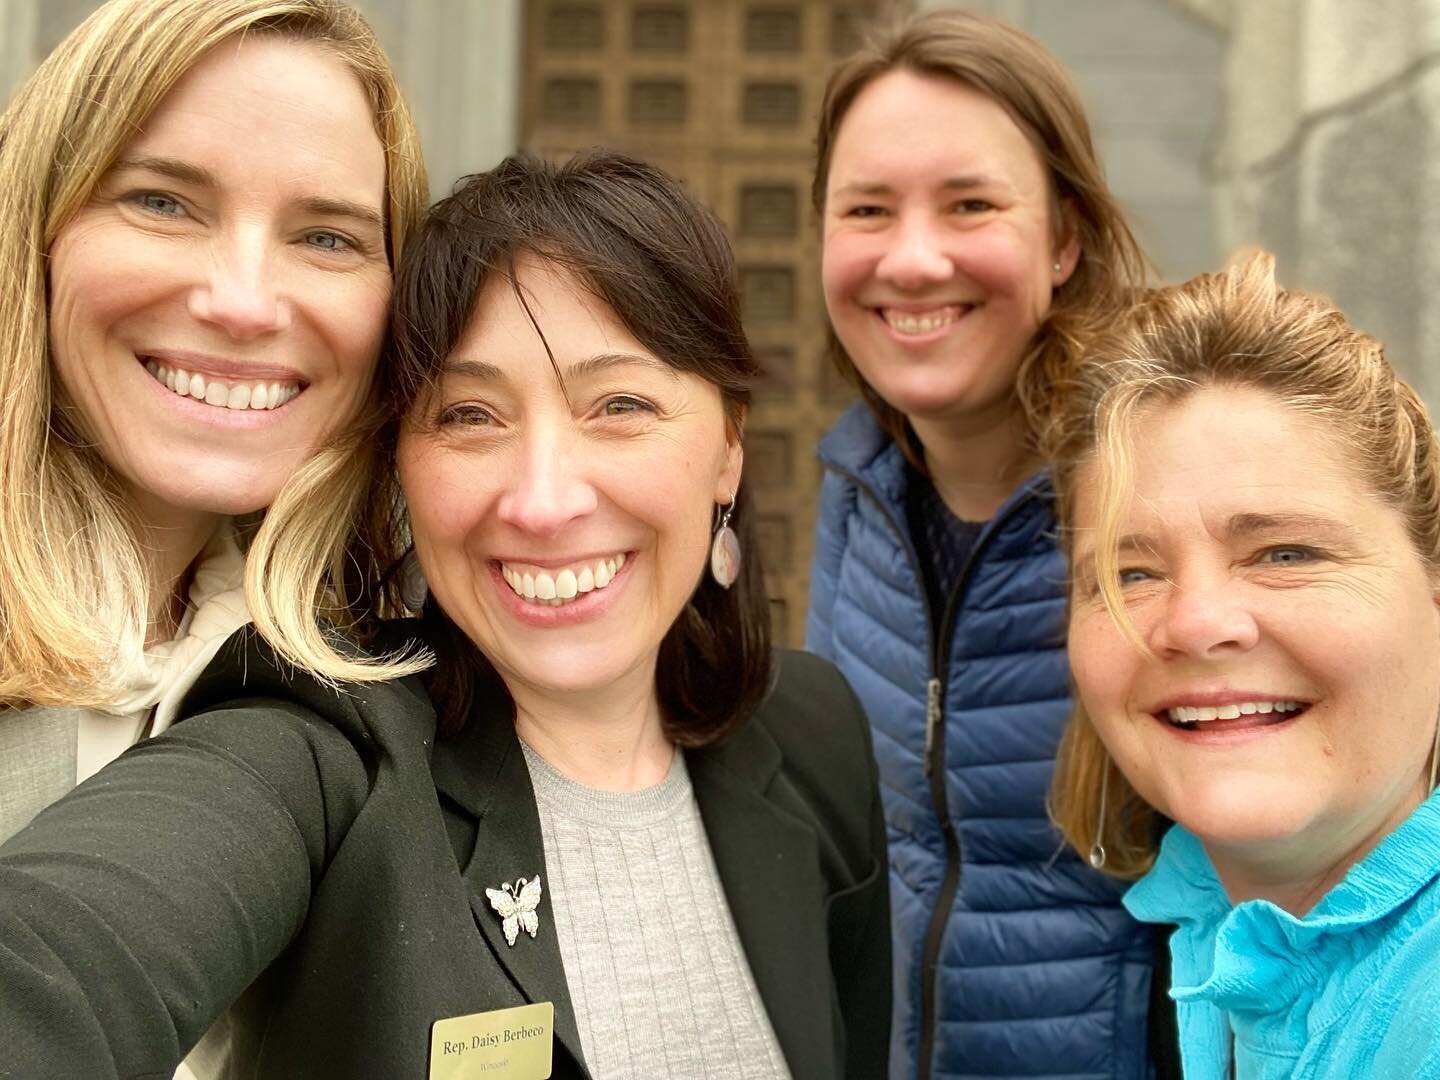 Can I get a round of applause for these incredible women? Our Attorney General, Secretary of State and Vice Chair of State Dems are protecting your right to vote, your bodily autonomy and reproductive rights and so much more. This kind of energy is w